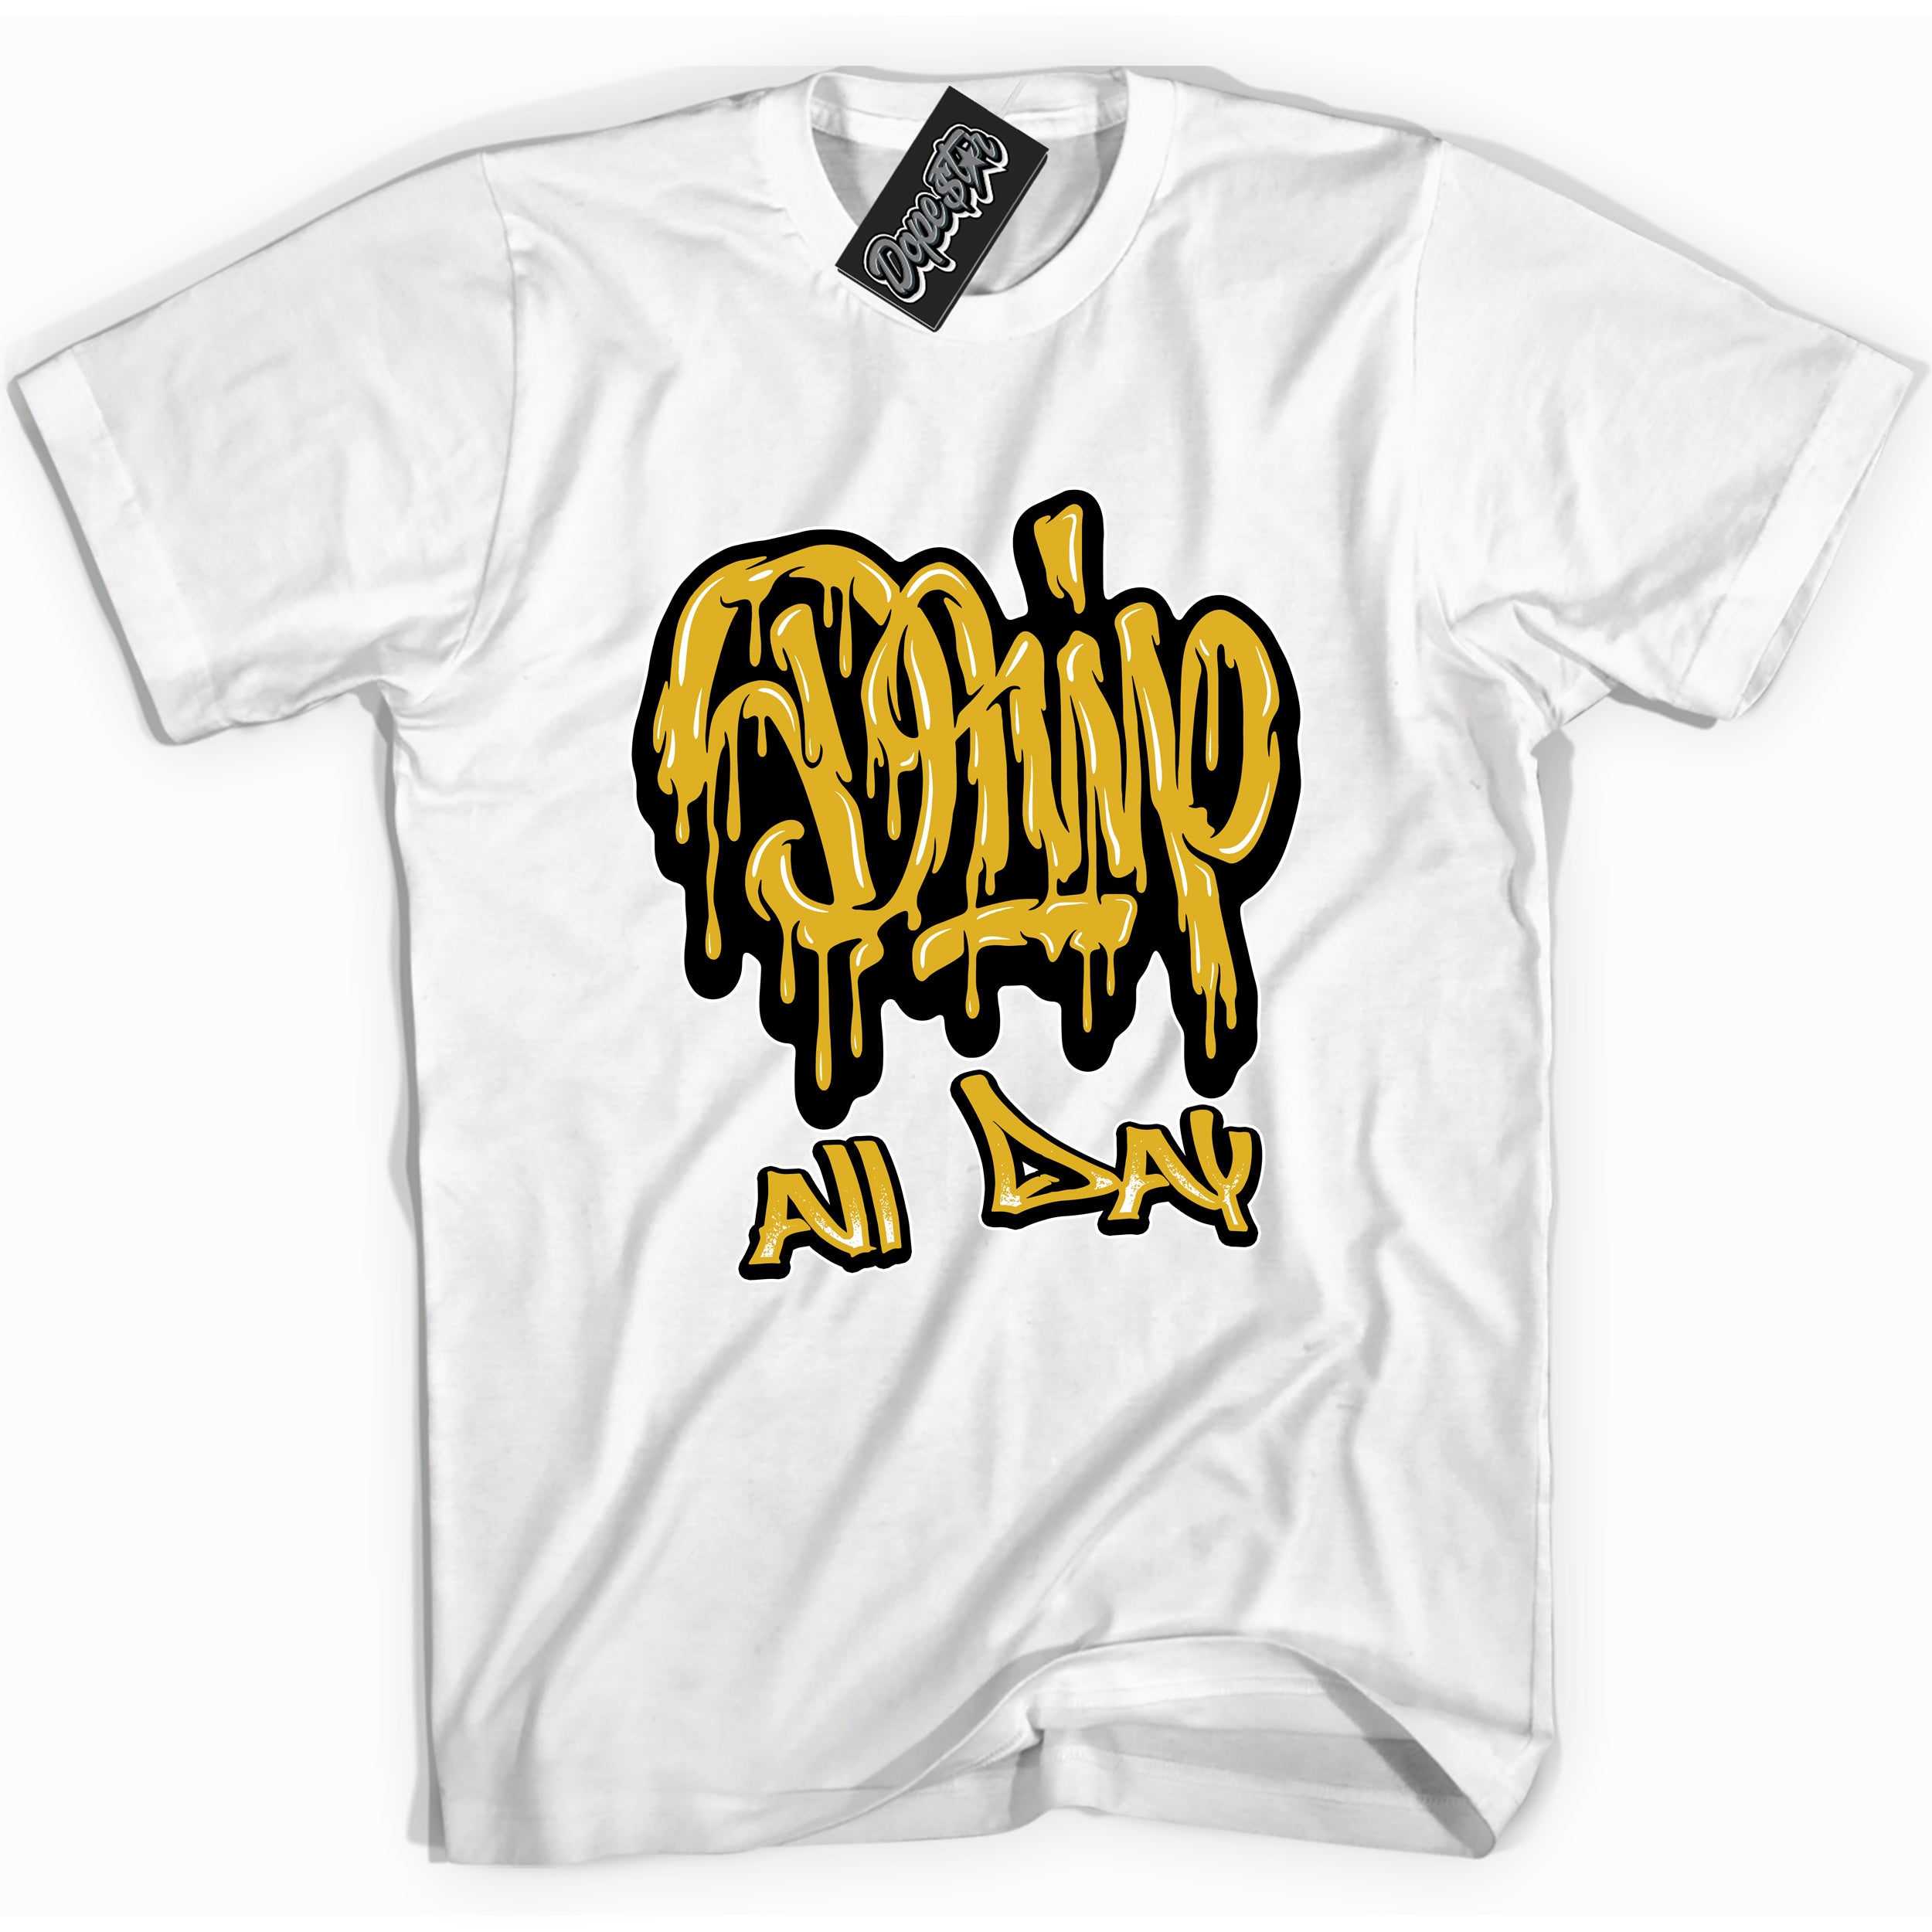 Cool White Shirt with “ Drip All Day” design that perfectly matches Yellow Ochre 6s Sneakers.